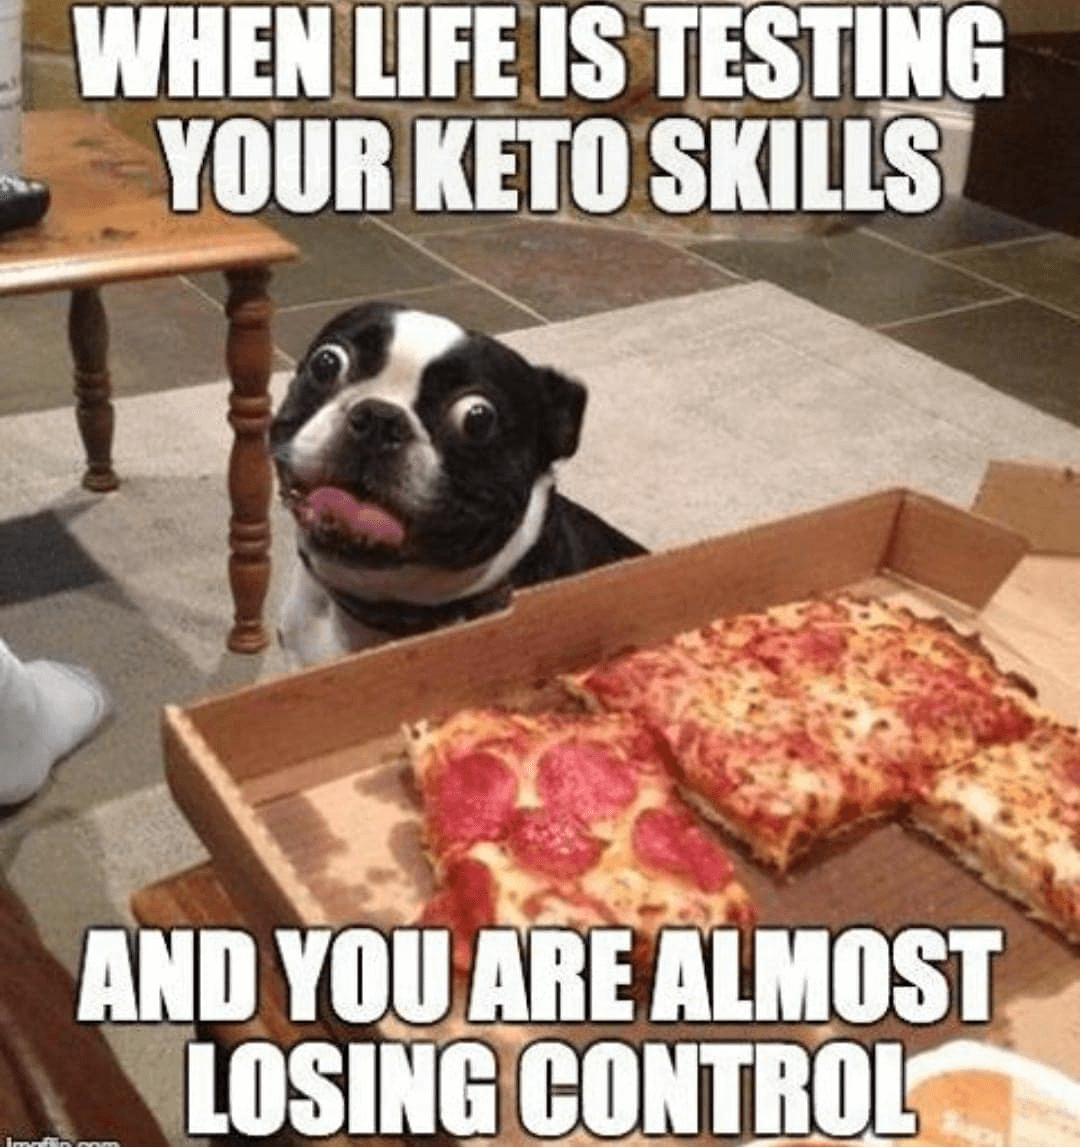 25 Best Funny Keto Memes And Keto Quotes (2020)